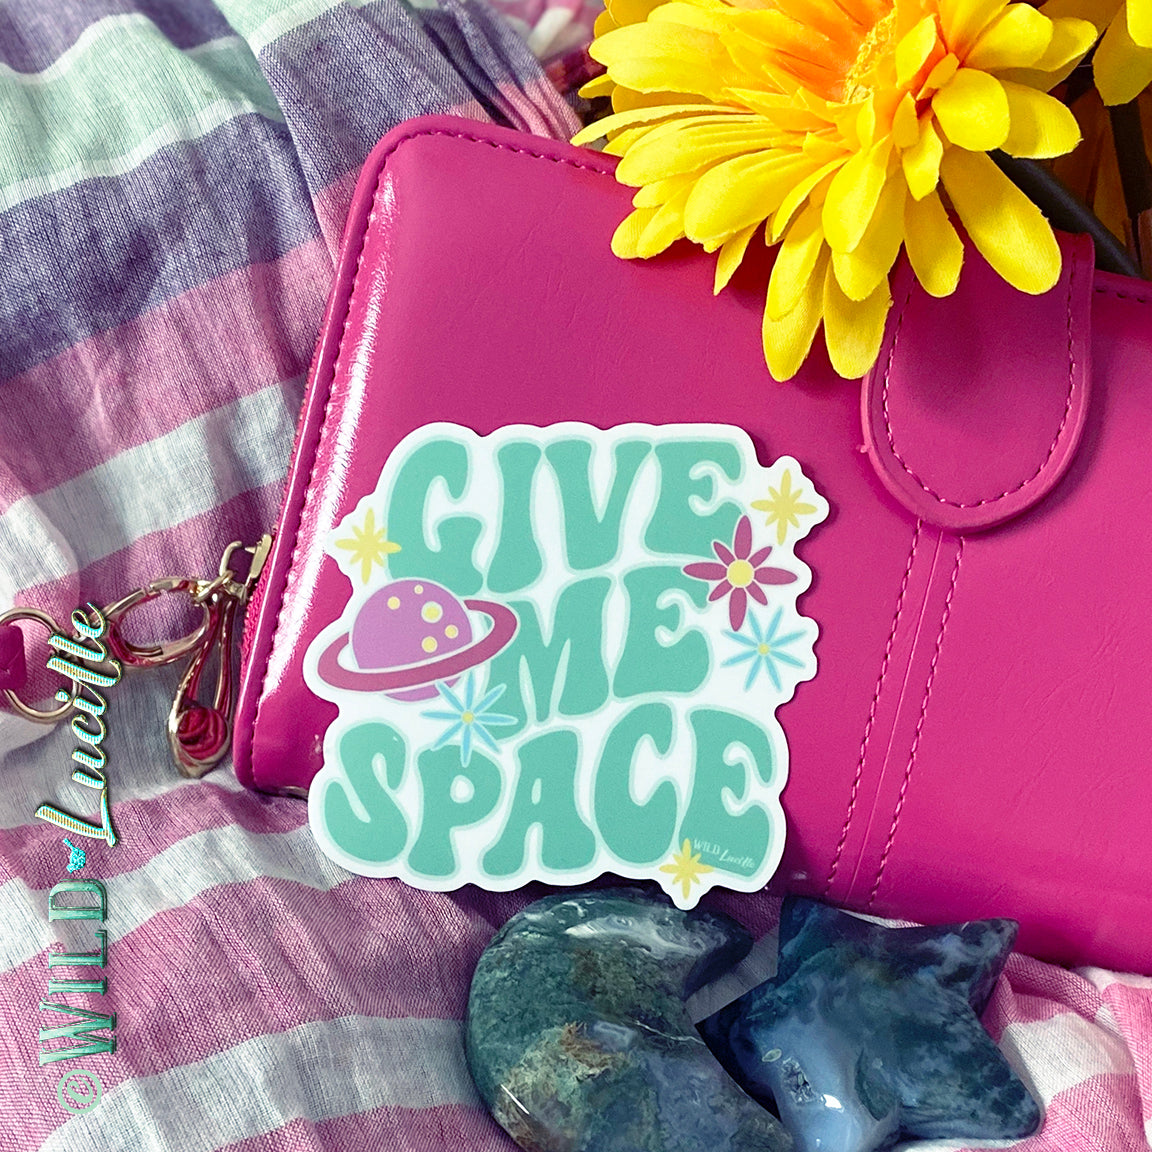 Give Me Space - Retro Sticker Decal